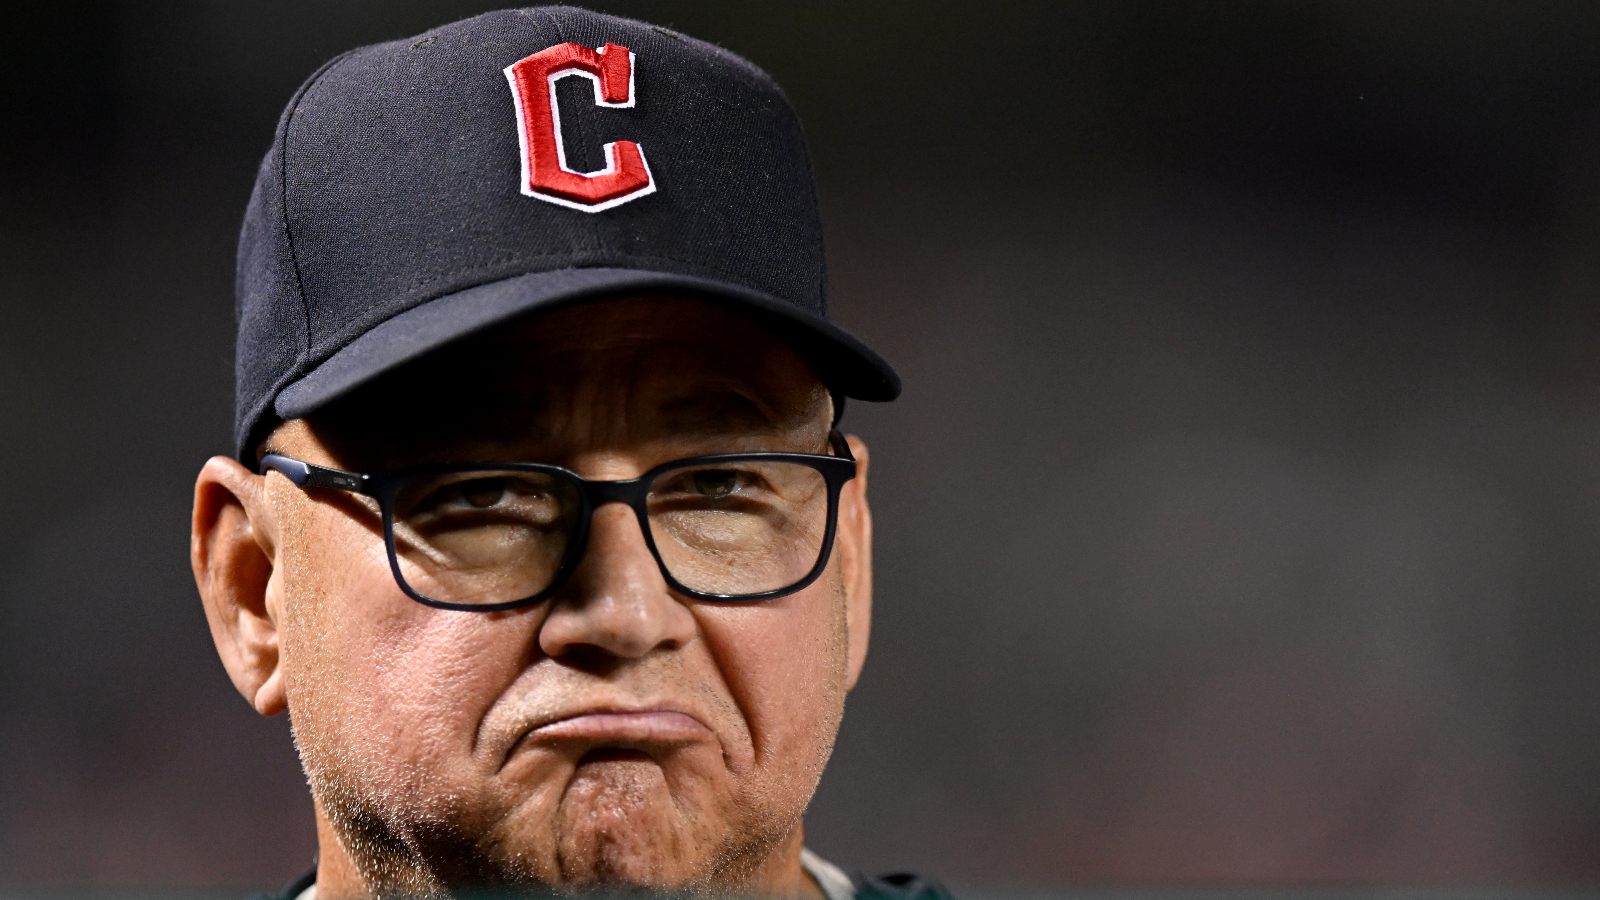 Terry Francona's Scooter Stolen Again, Reportedly Defecated On